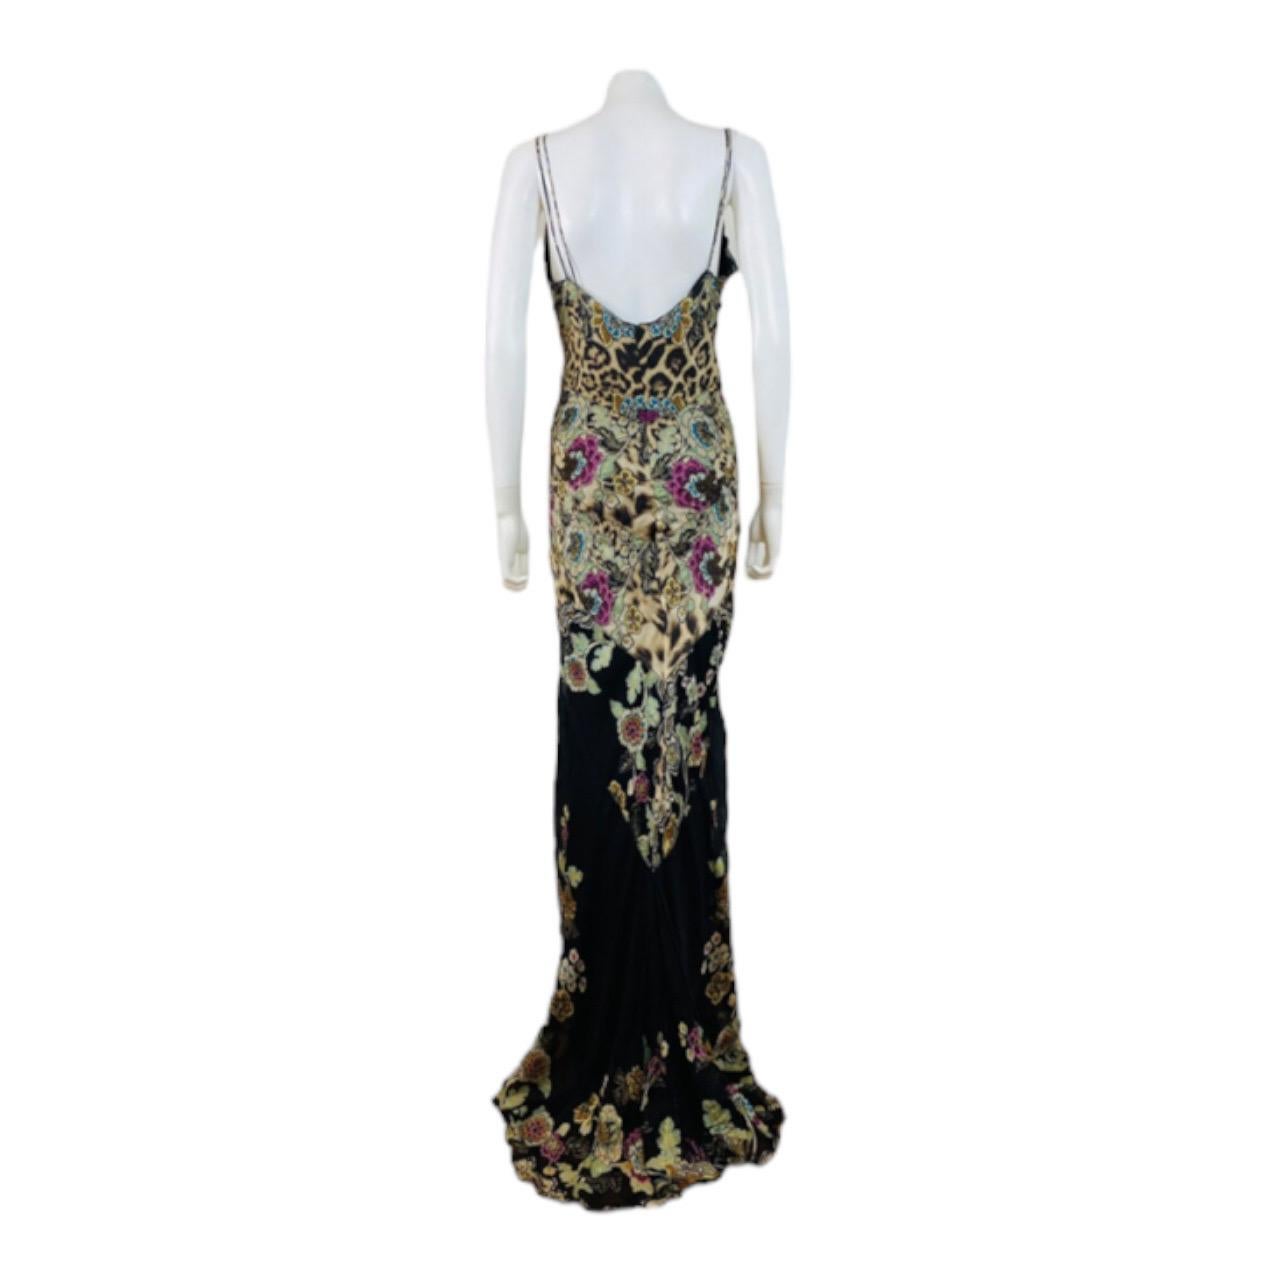 Vintage S/S 2003 Roberto Cavalli Black Chinoiserie Leopard Floral Dress Gown For Sale 3